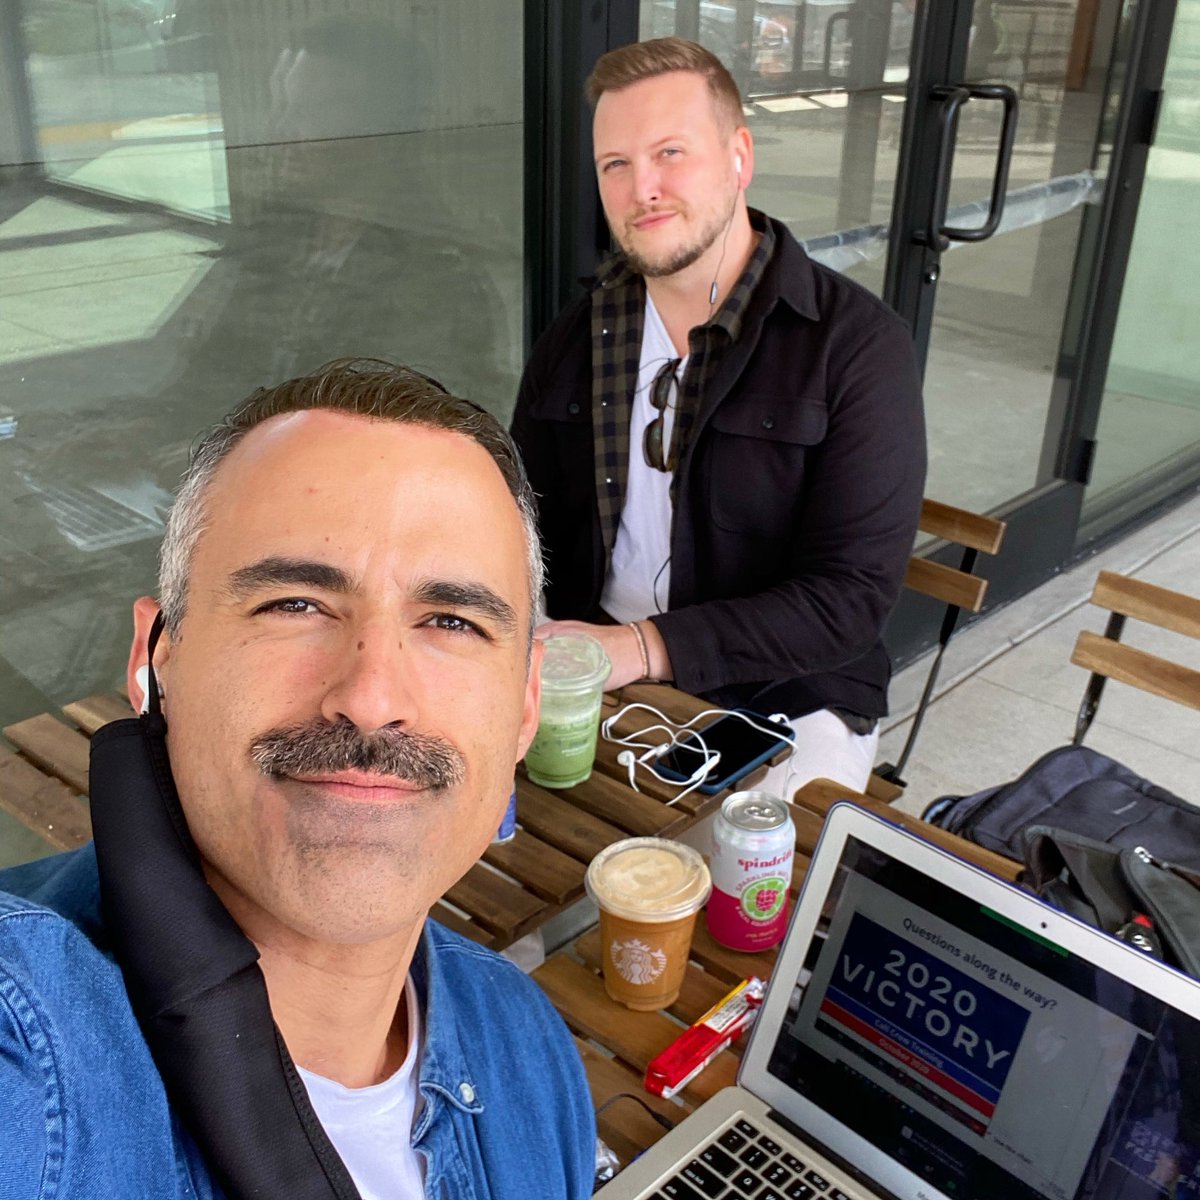 This afternoon, my  @StonewallDemsLA colleague  @jonathanbwelch and I settled in on a Starbucks outdoor patio and spent a few hours making calls to Florida for Joe Biden. As we we wrapped up, we noticed a man on the corner across the street waving a Trump/Pence sign to passersby.